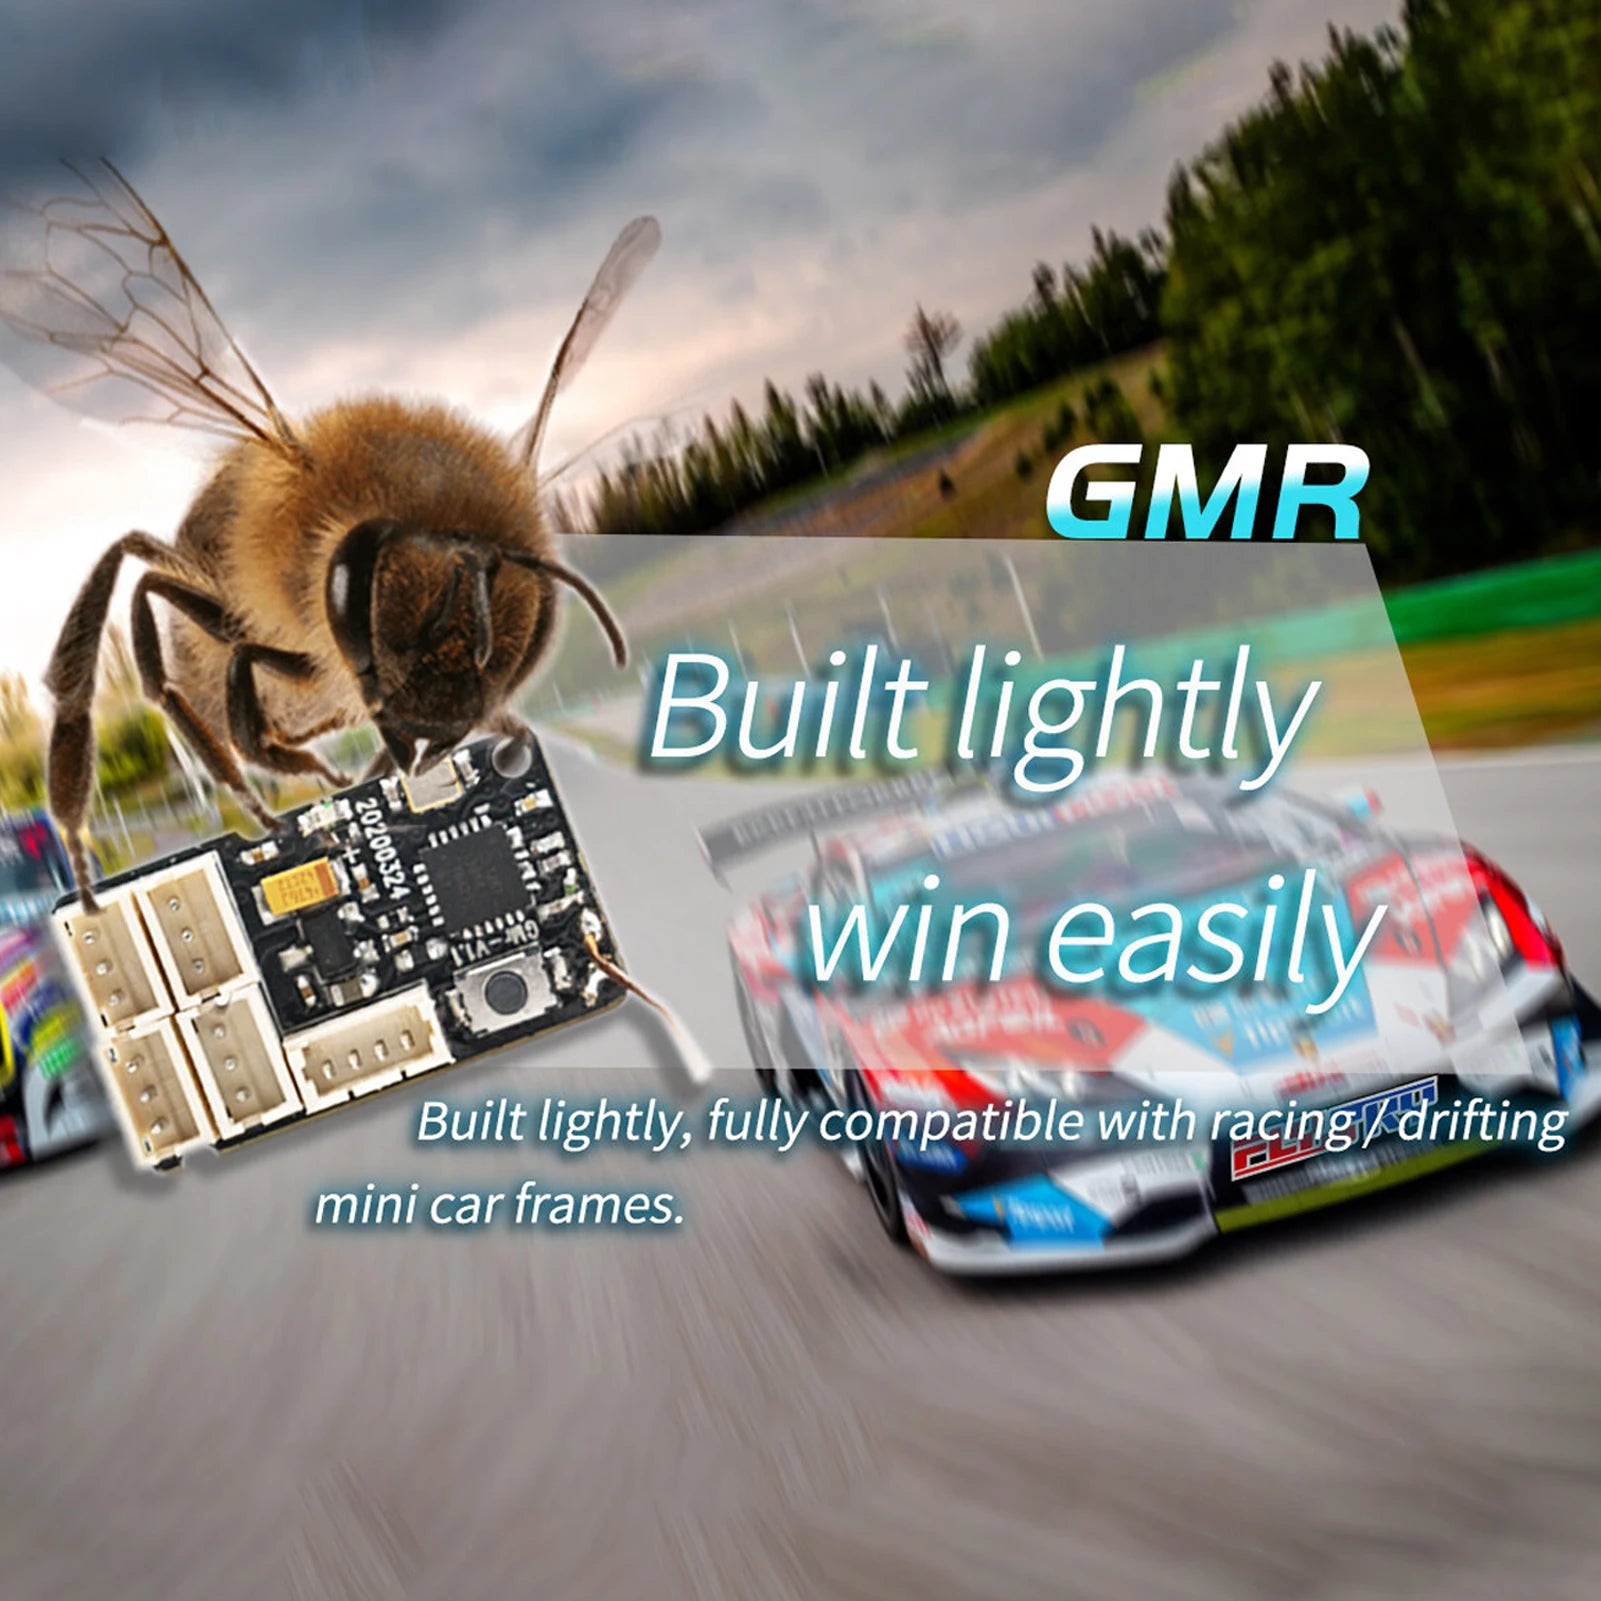 GMR Built lightly win easily Built lightly, fully compatible with racing / drifting mini car